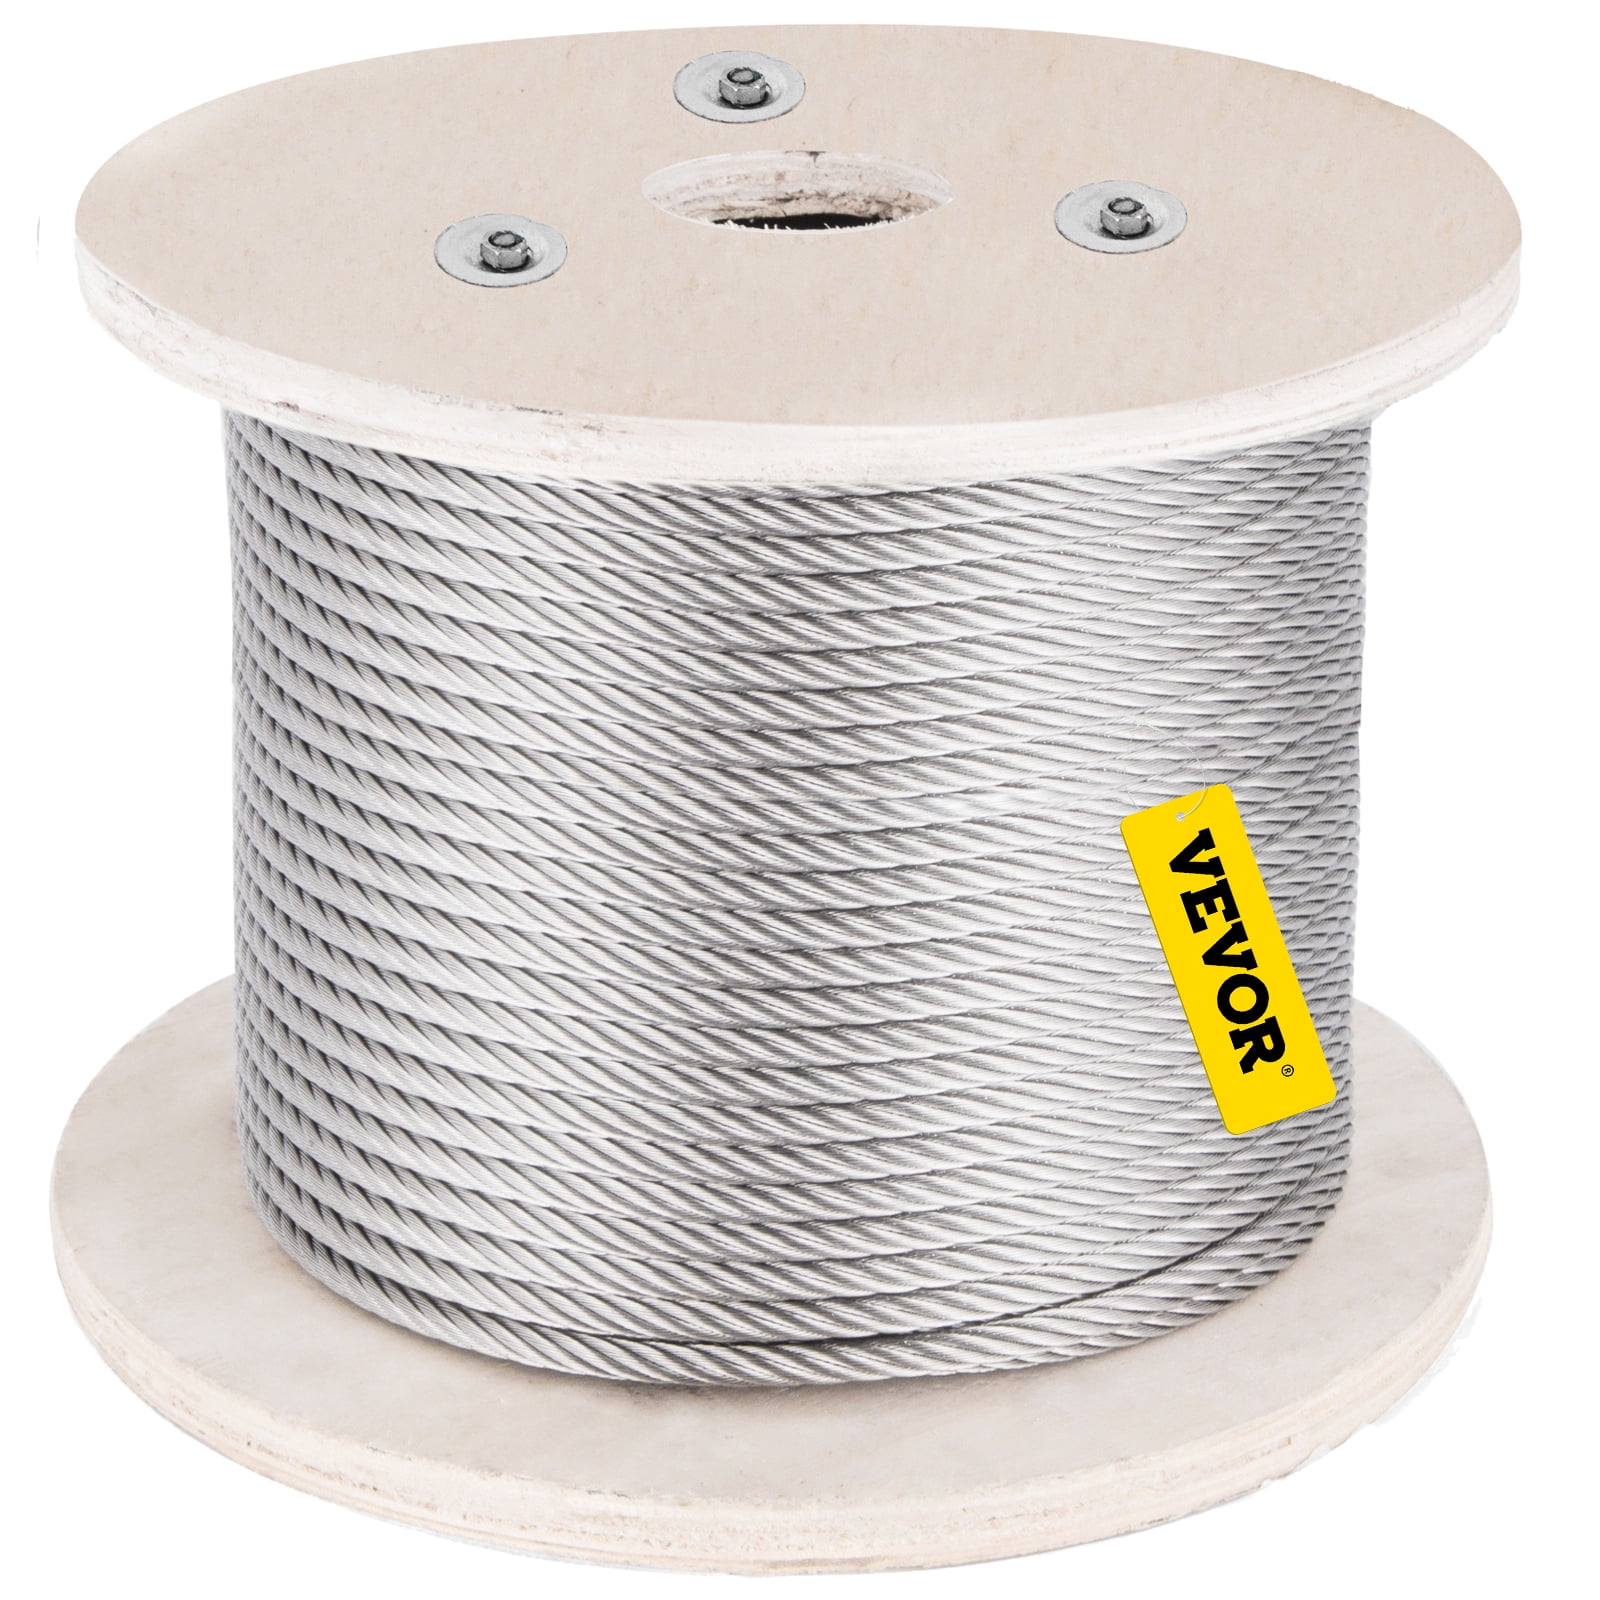 T316 Stainless Steel Cable Wire Rope,3/16",1x19,200ft Lifting Aircraft Petroleum 